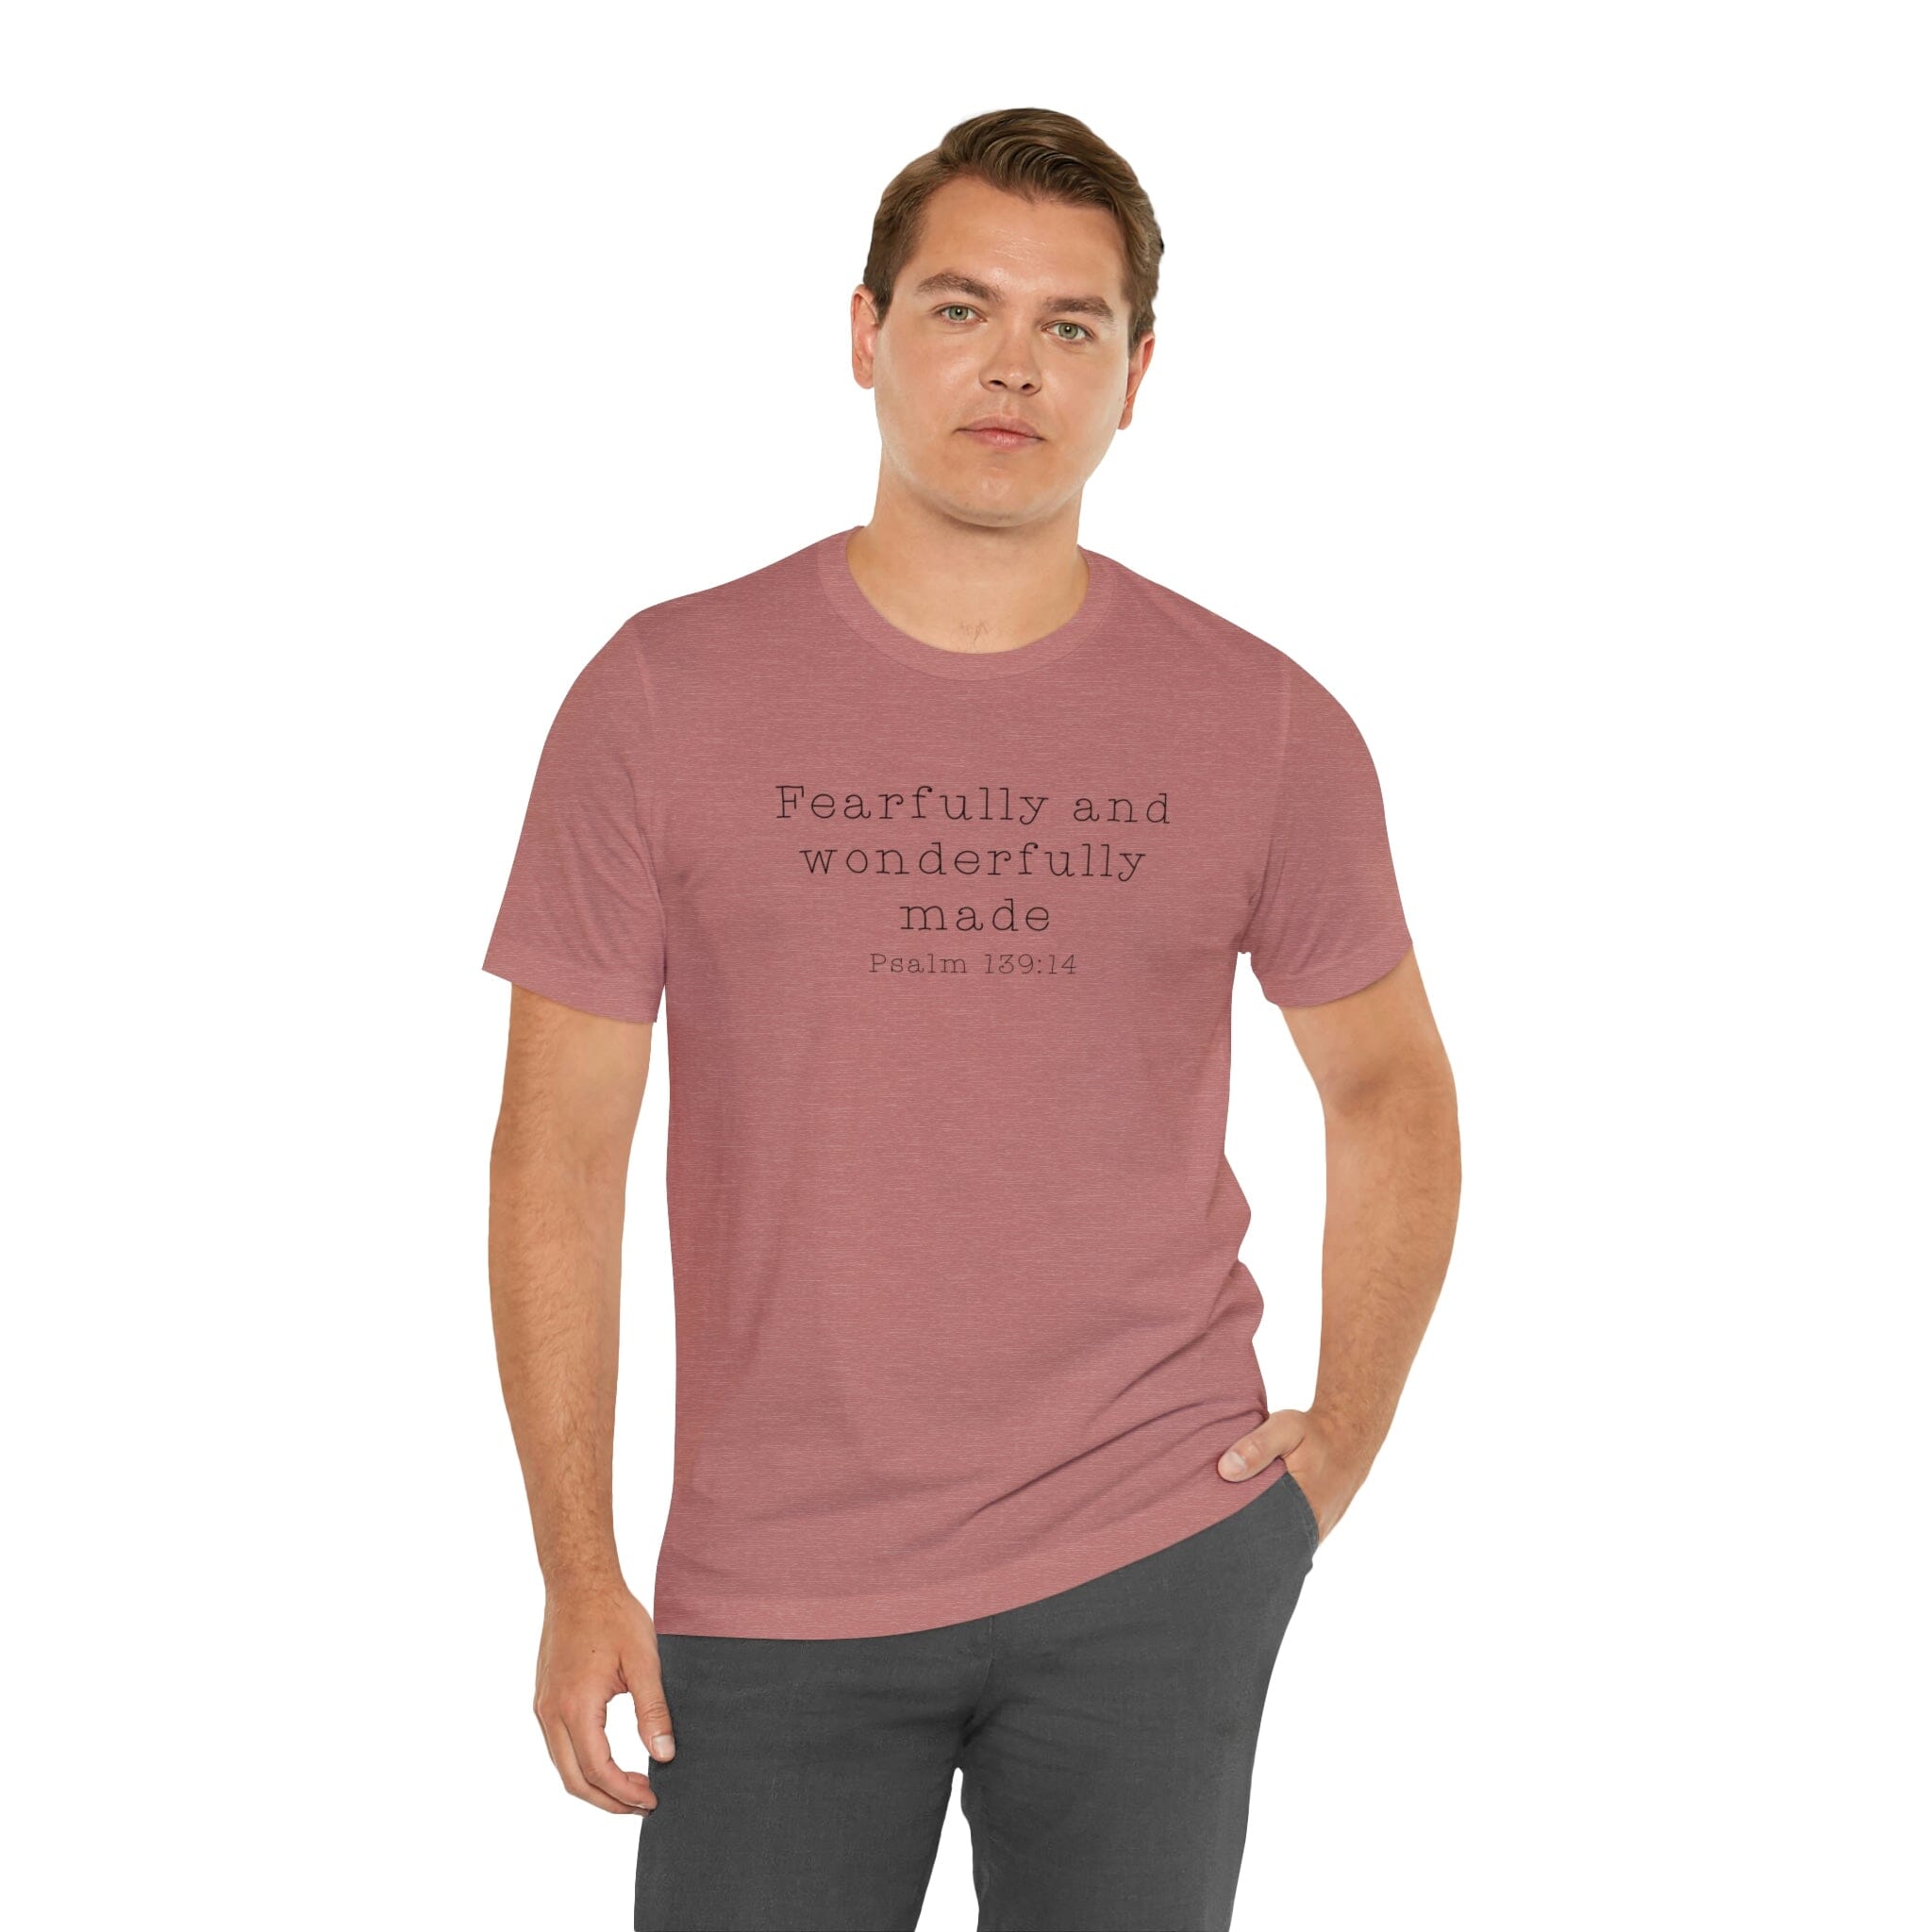 "Fearfully and Wonderfully Made" Bella Canvas Unisex Jersey Short Sleeve Tee